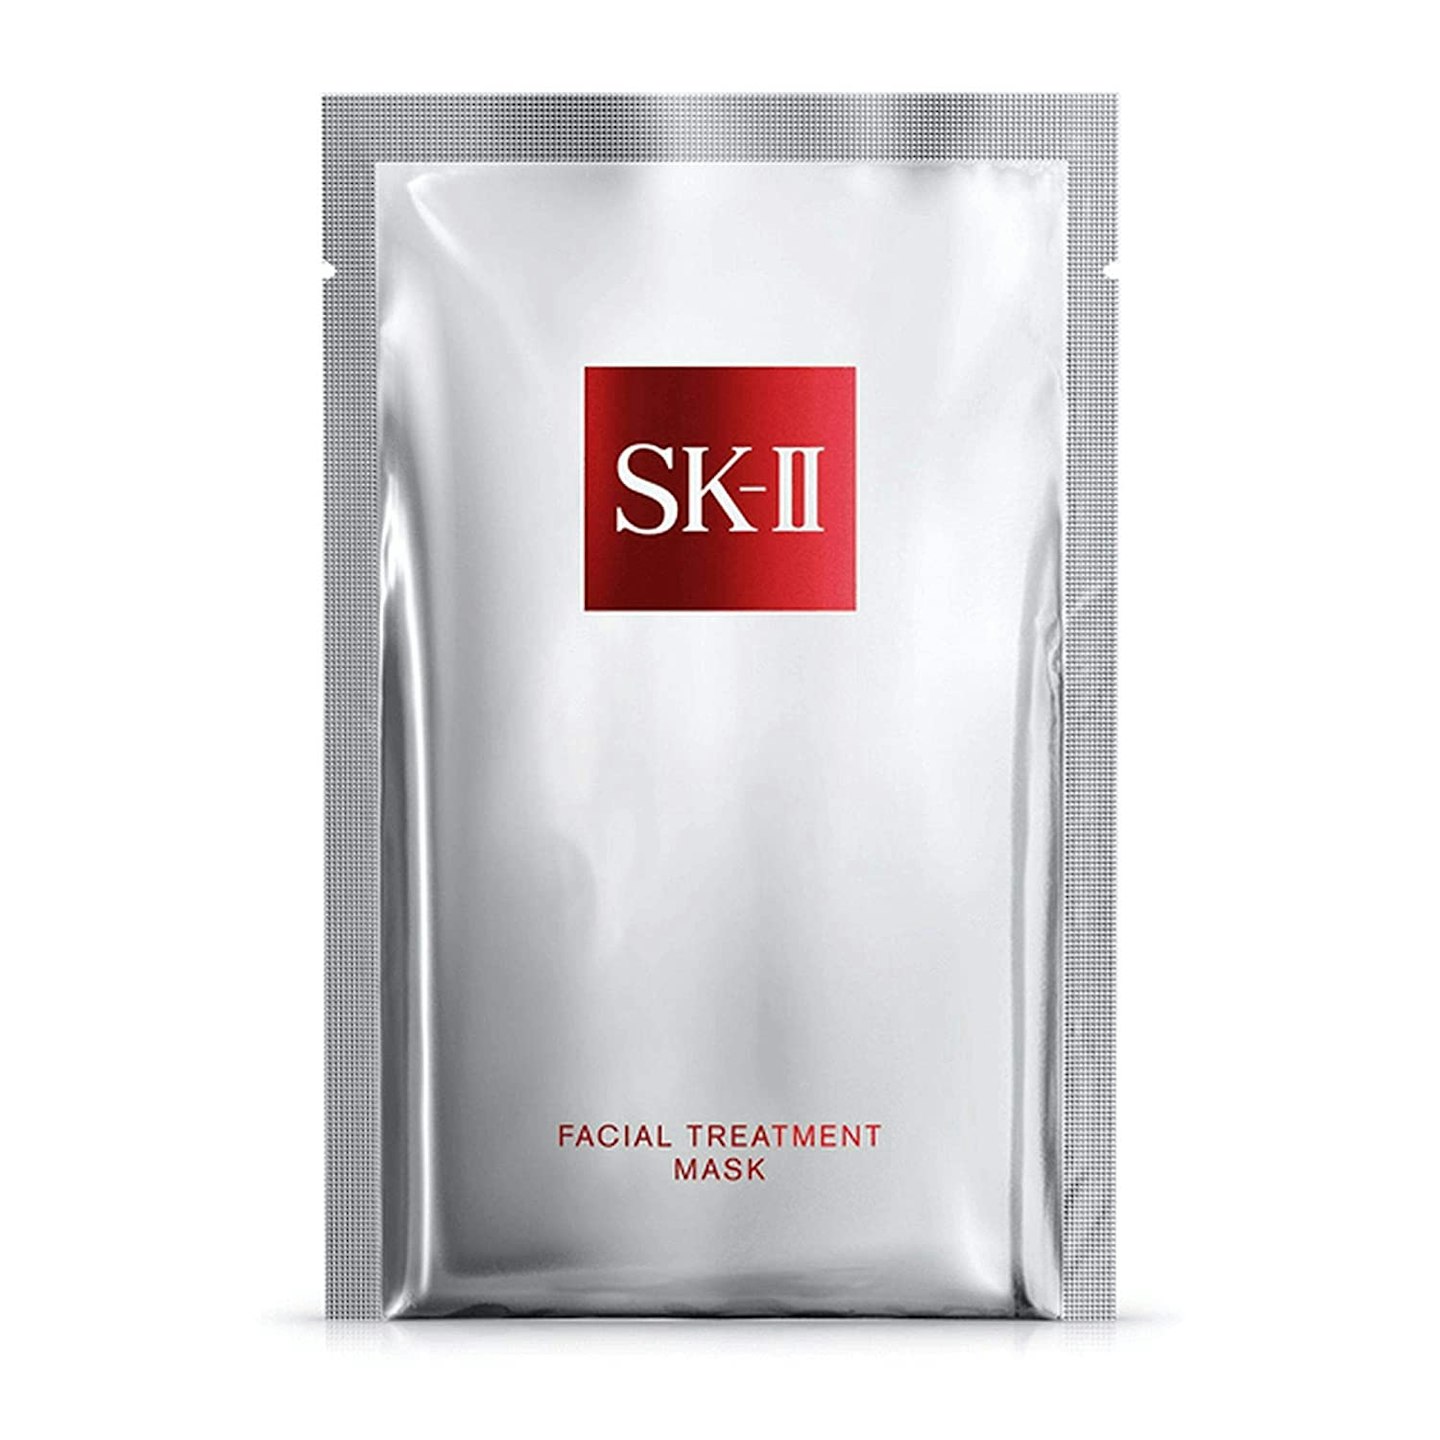 SK-II Facial Treatment Mask Pack Of 2, £48